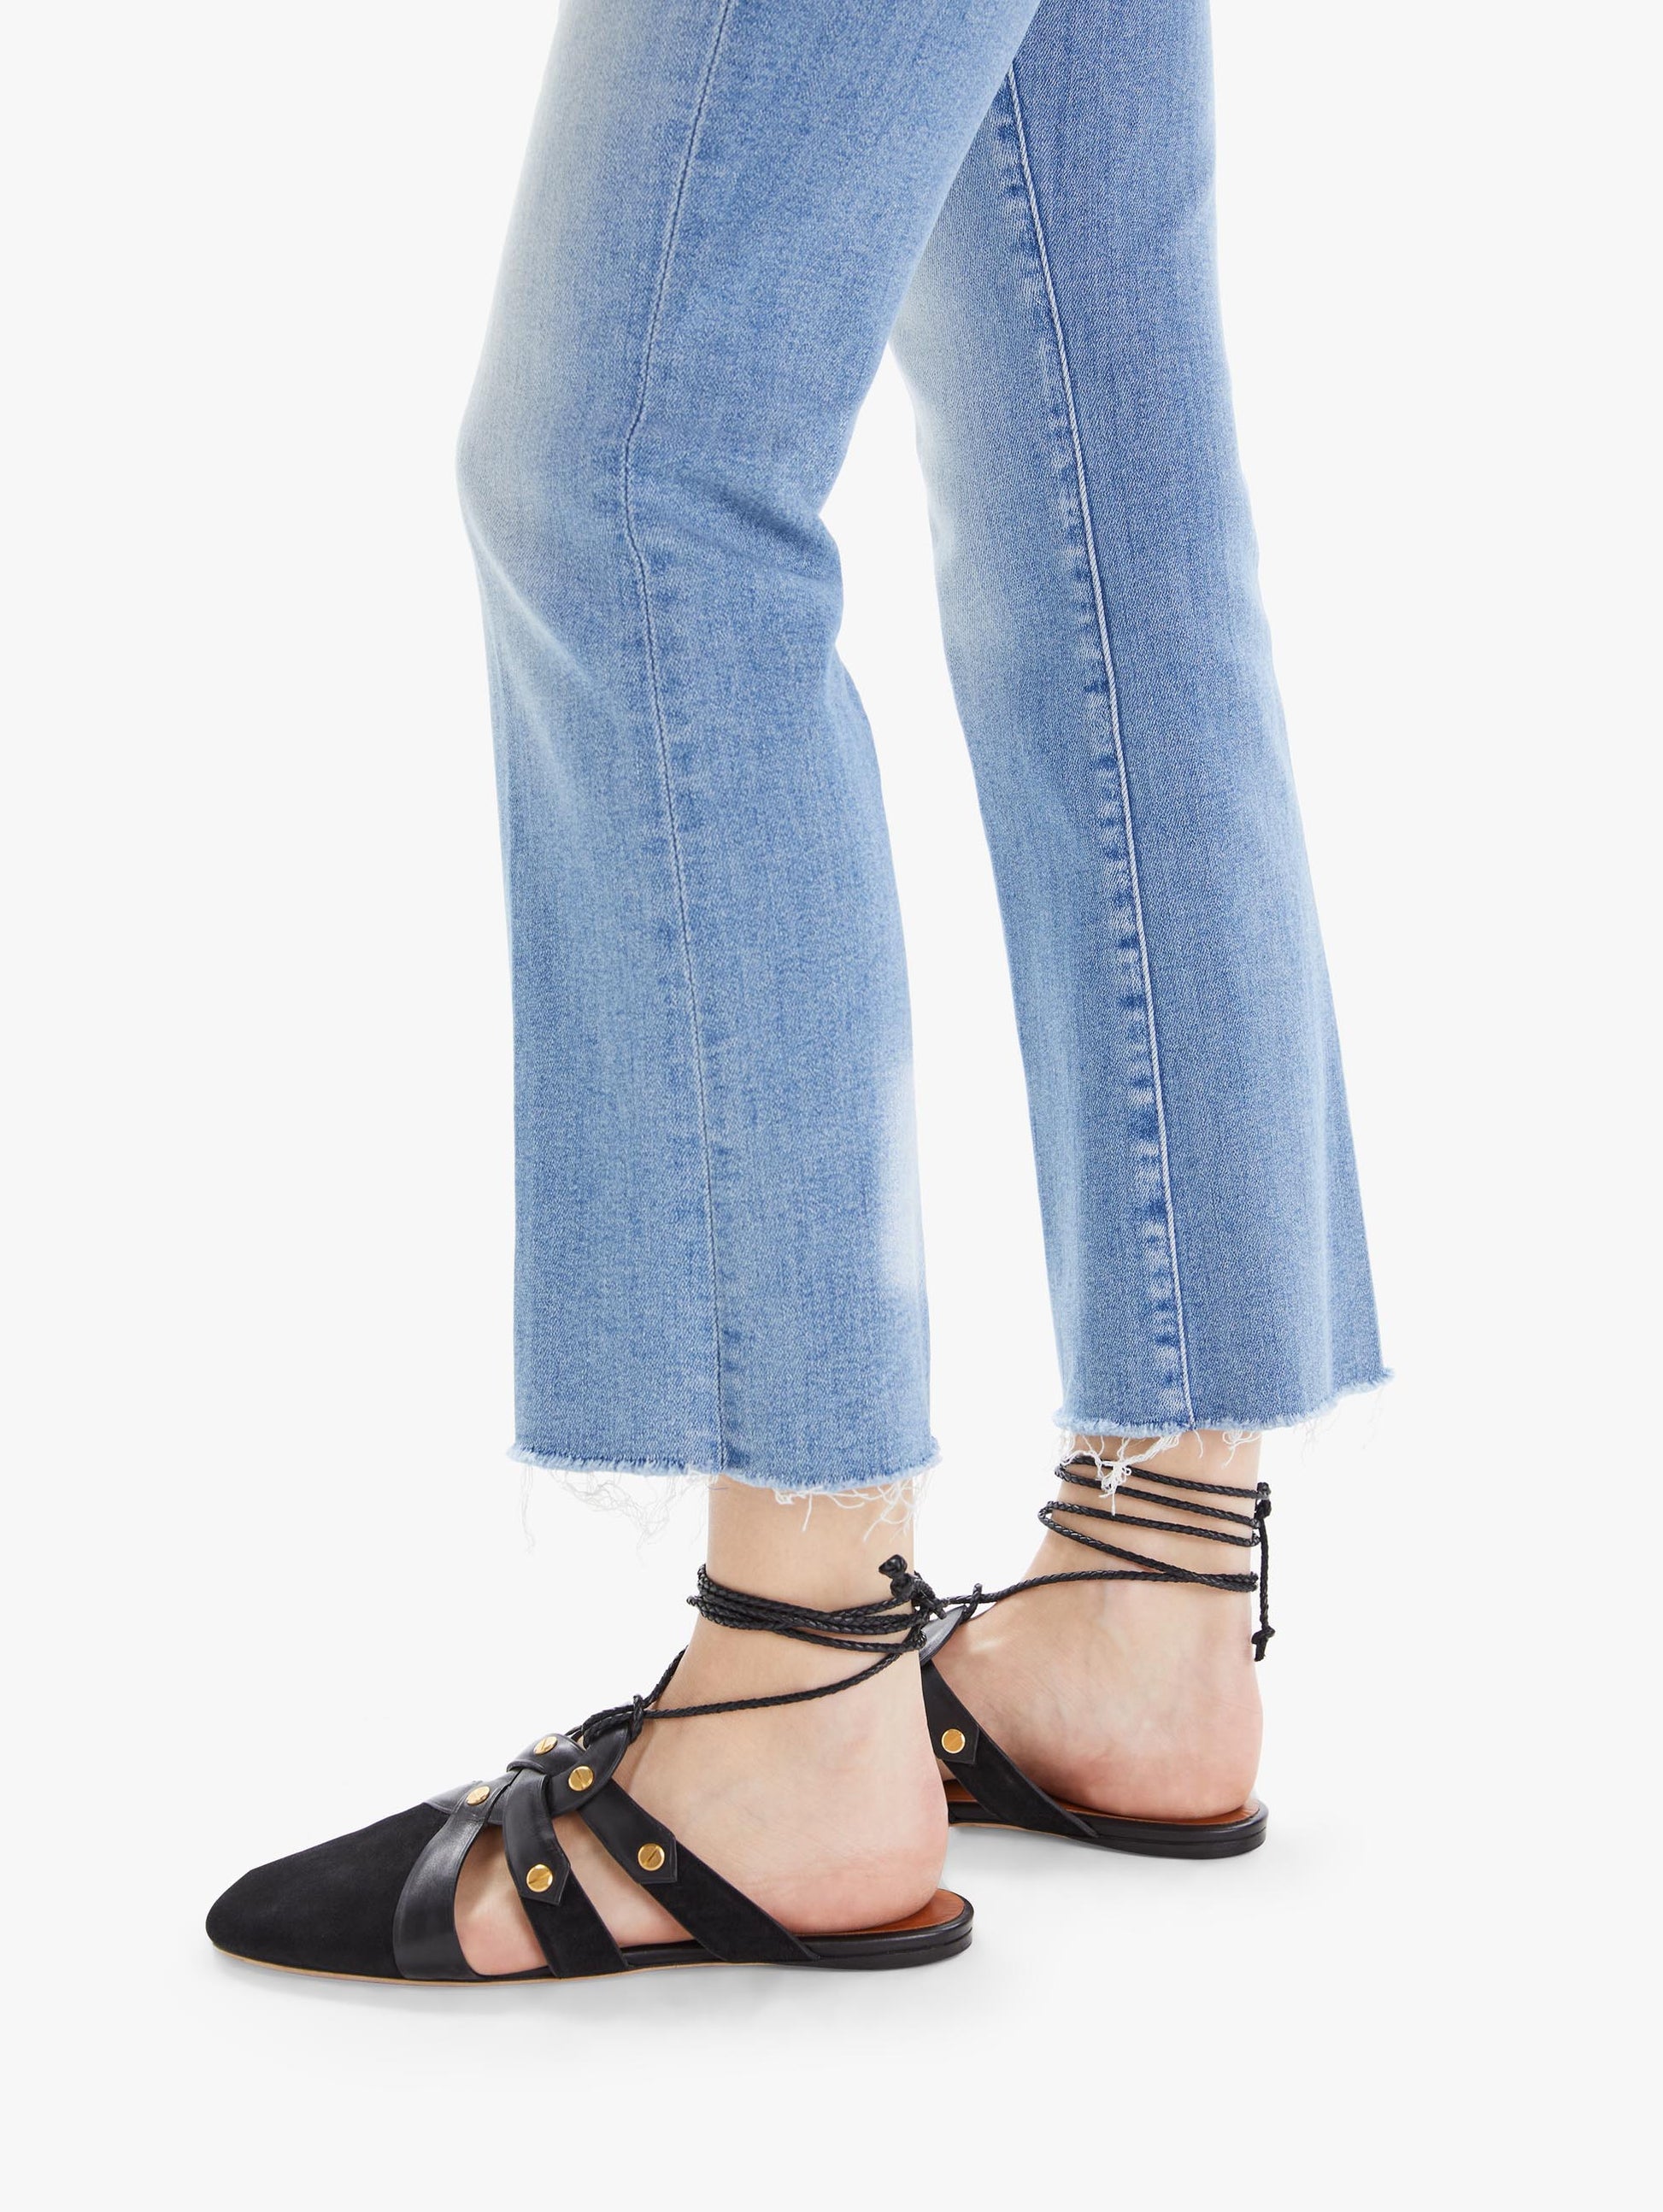 This pair of denim are high rise, with an ankle-length inseam and a raw hem.